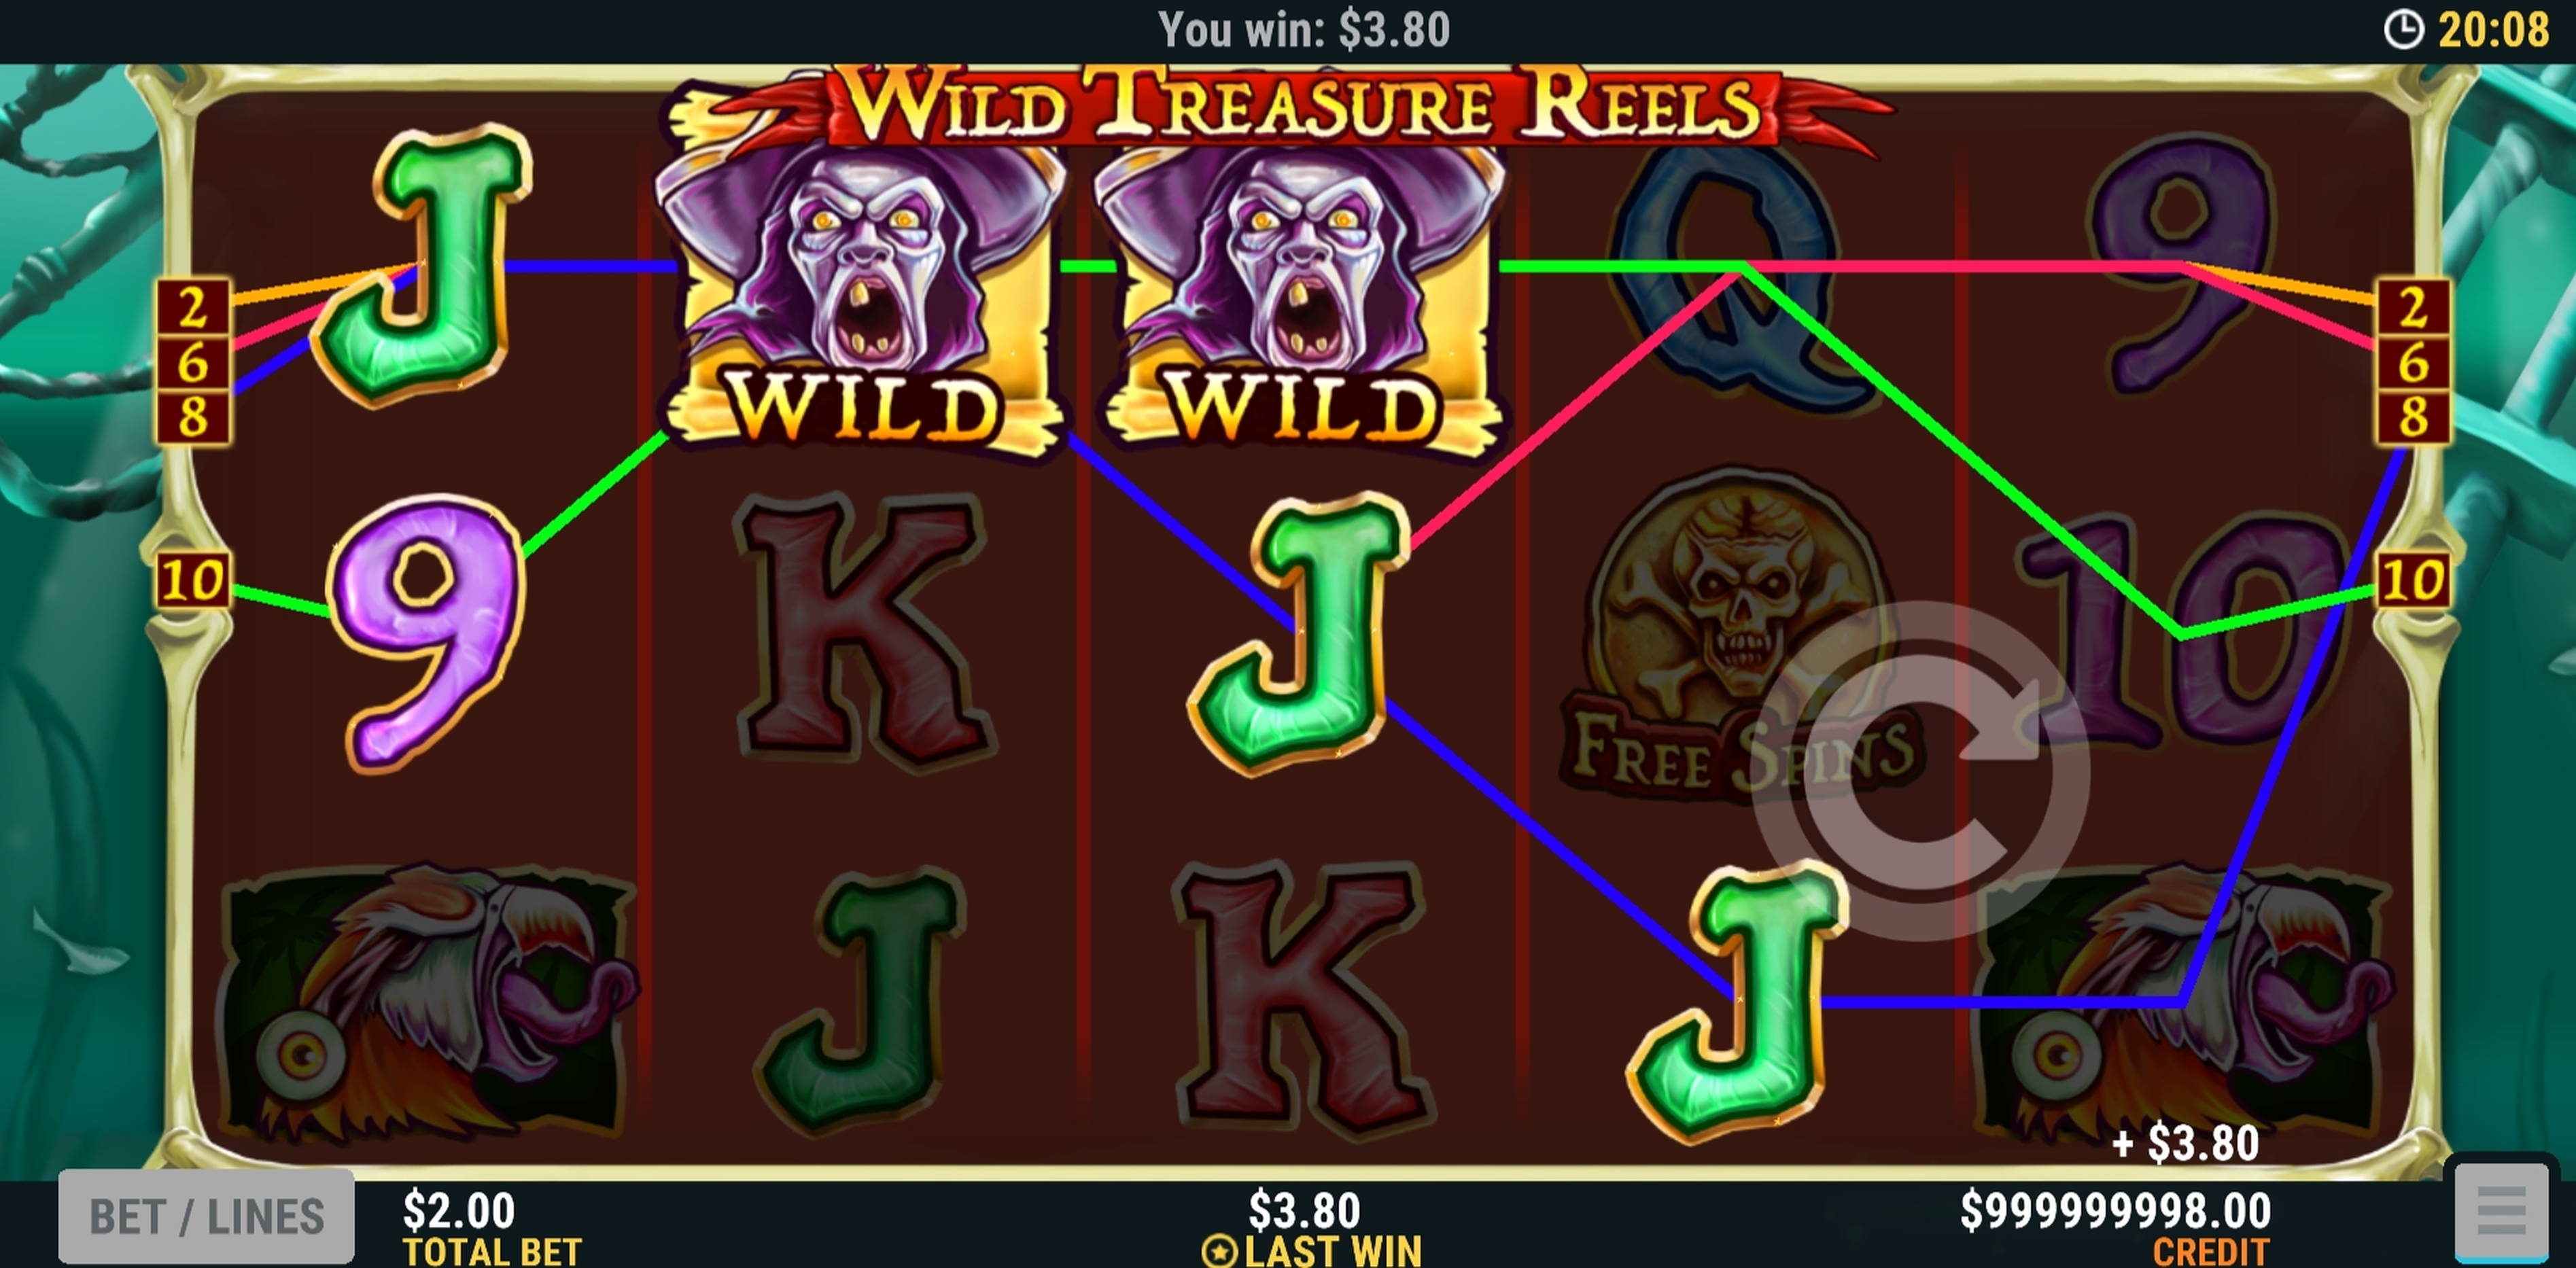 Win Money in Wild Treasure Reels Free Slot Game by Slot Factory